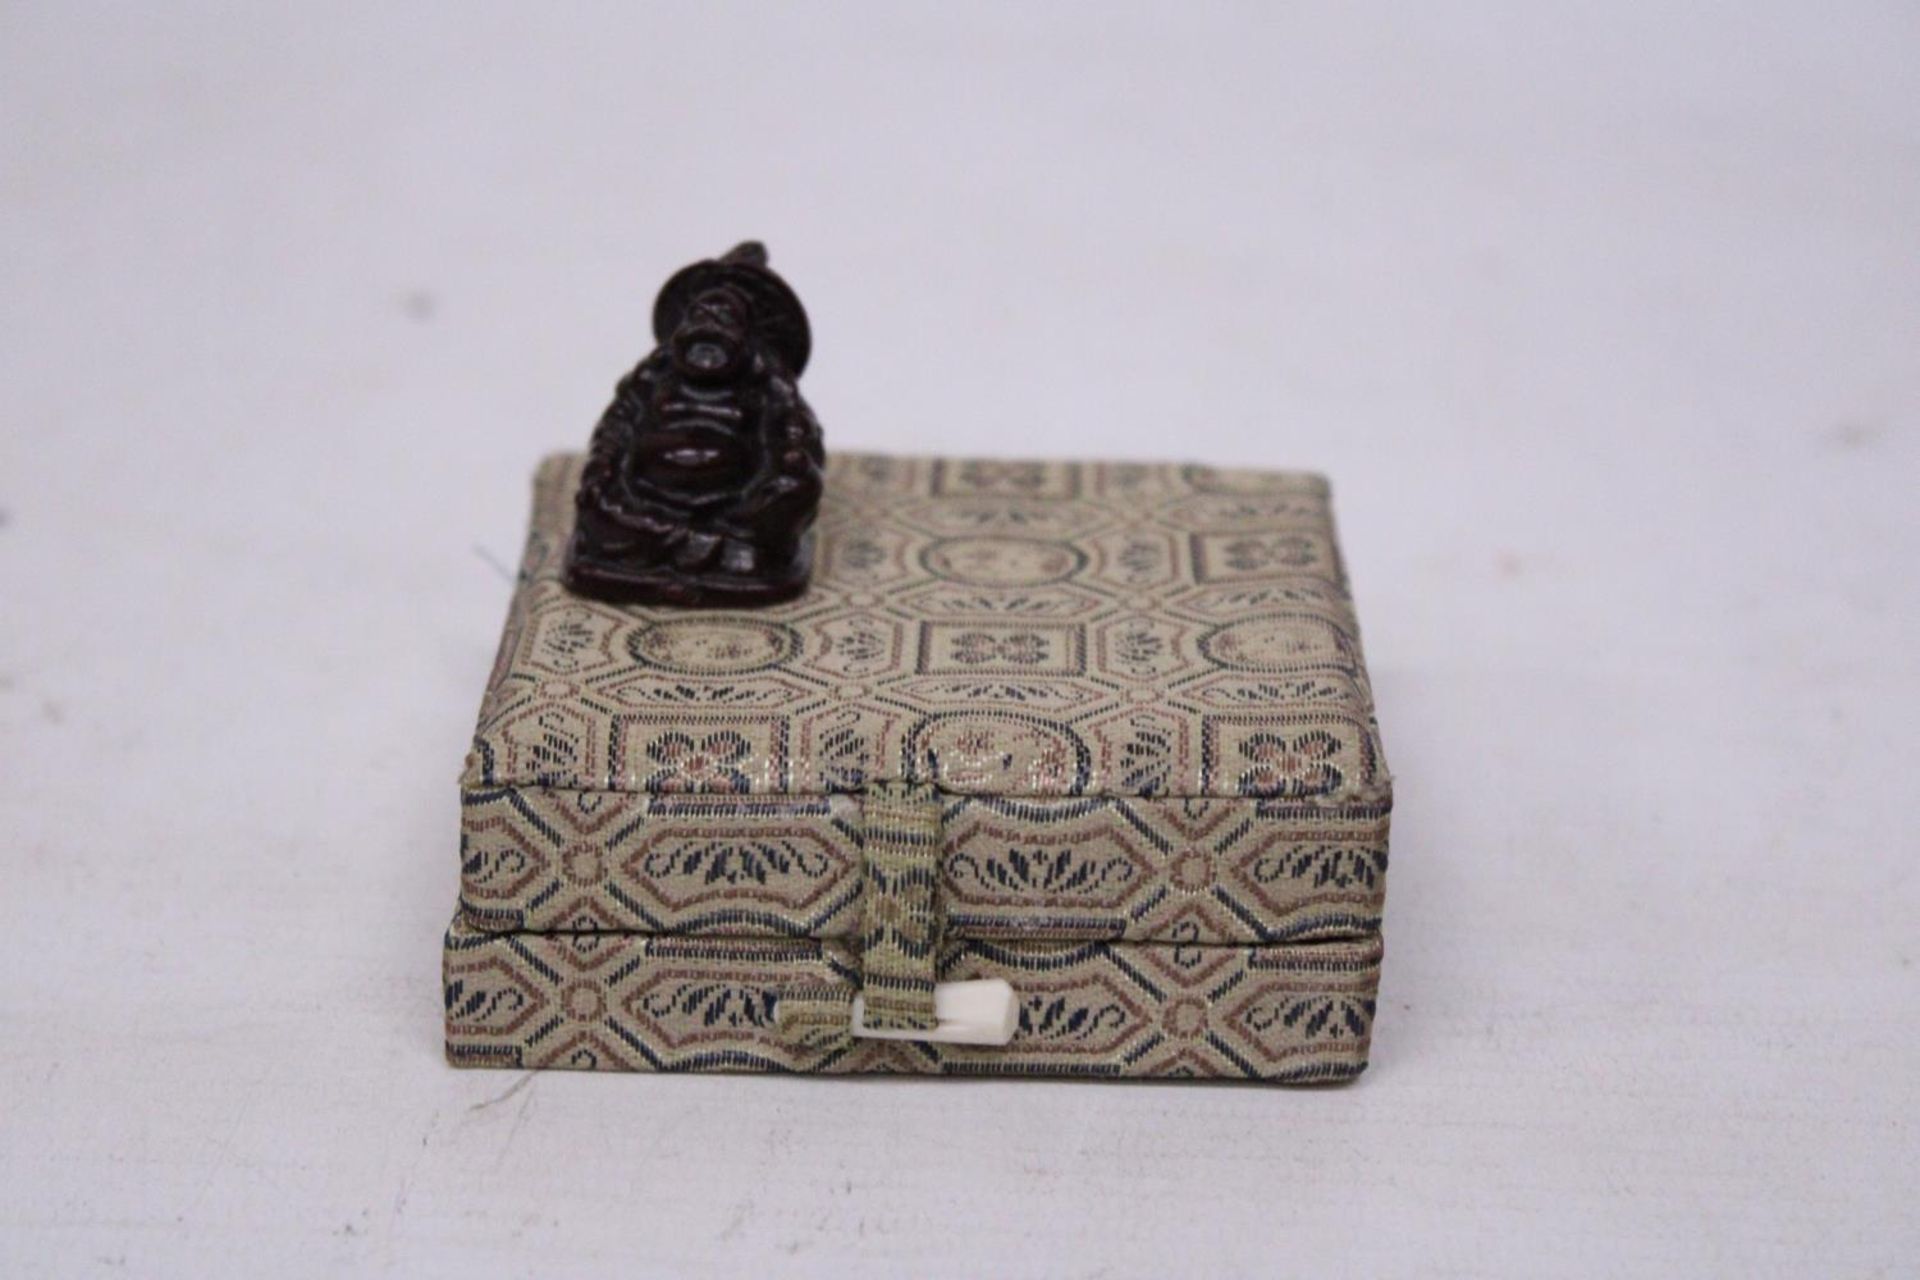 A BOXED BRONZE MEDAL "GREAT WALL OF CHINA" WITH A MINIATURE BUDDAH - Image 5 of 5